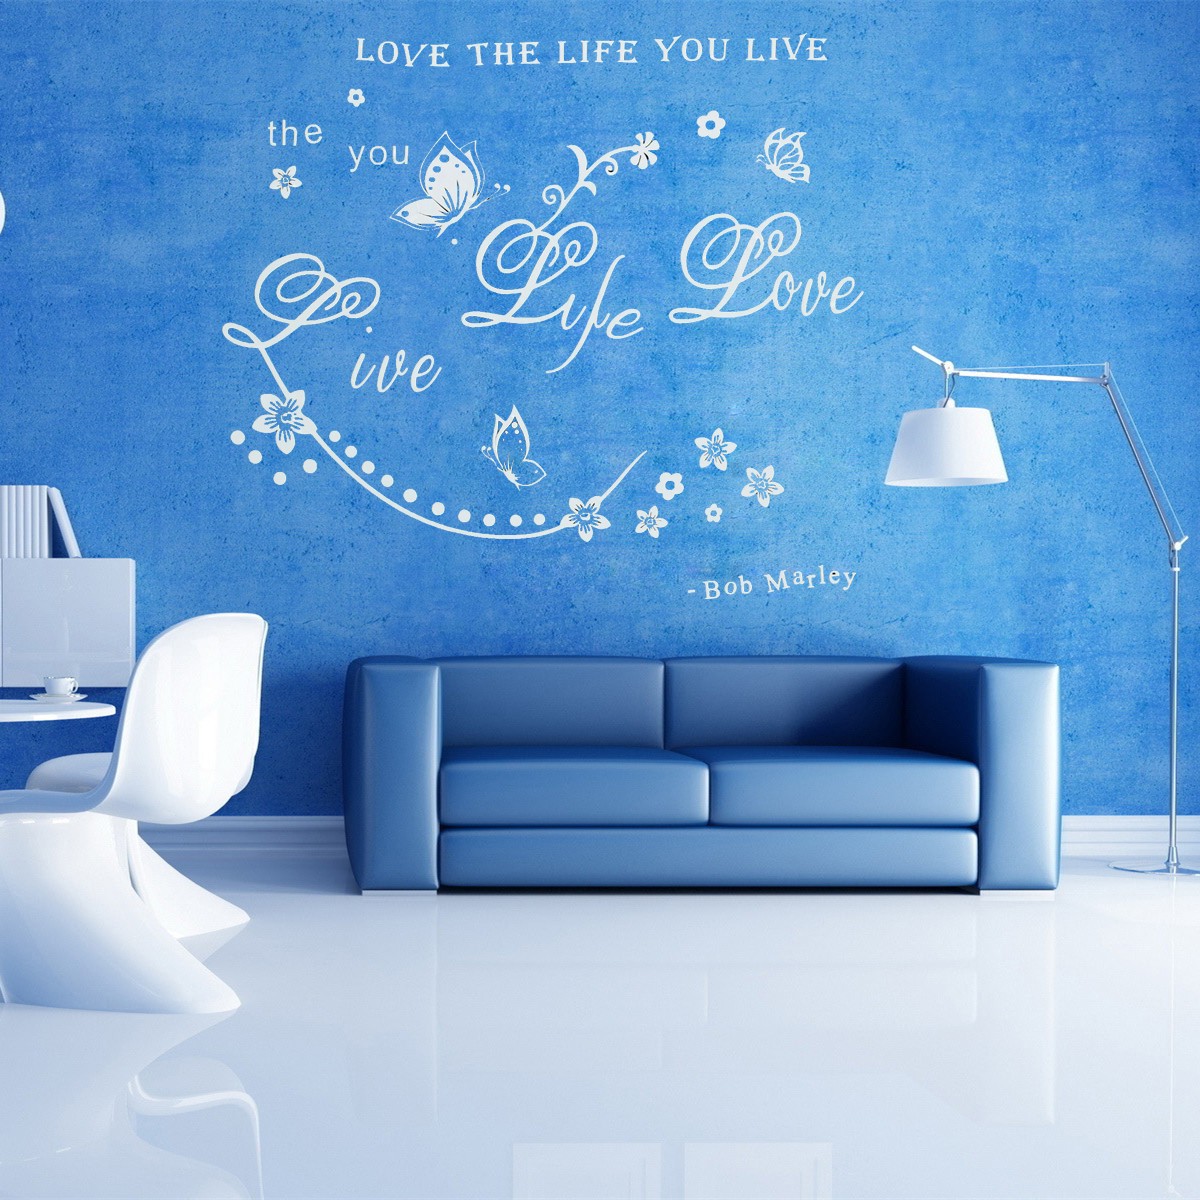 Removable-Wall-Sticker-Art-Decals-For-Home-Kitchen-Living-Room-Bedroom-Bathroom-Office-Decor-Water-R-1722049-4